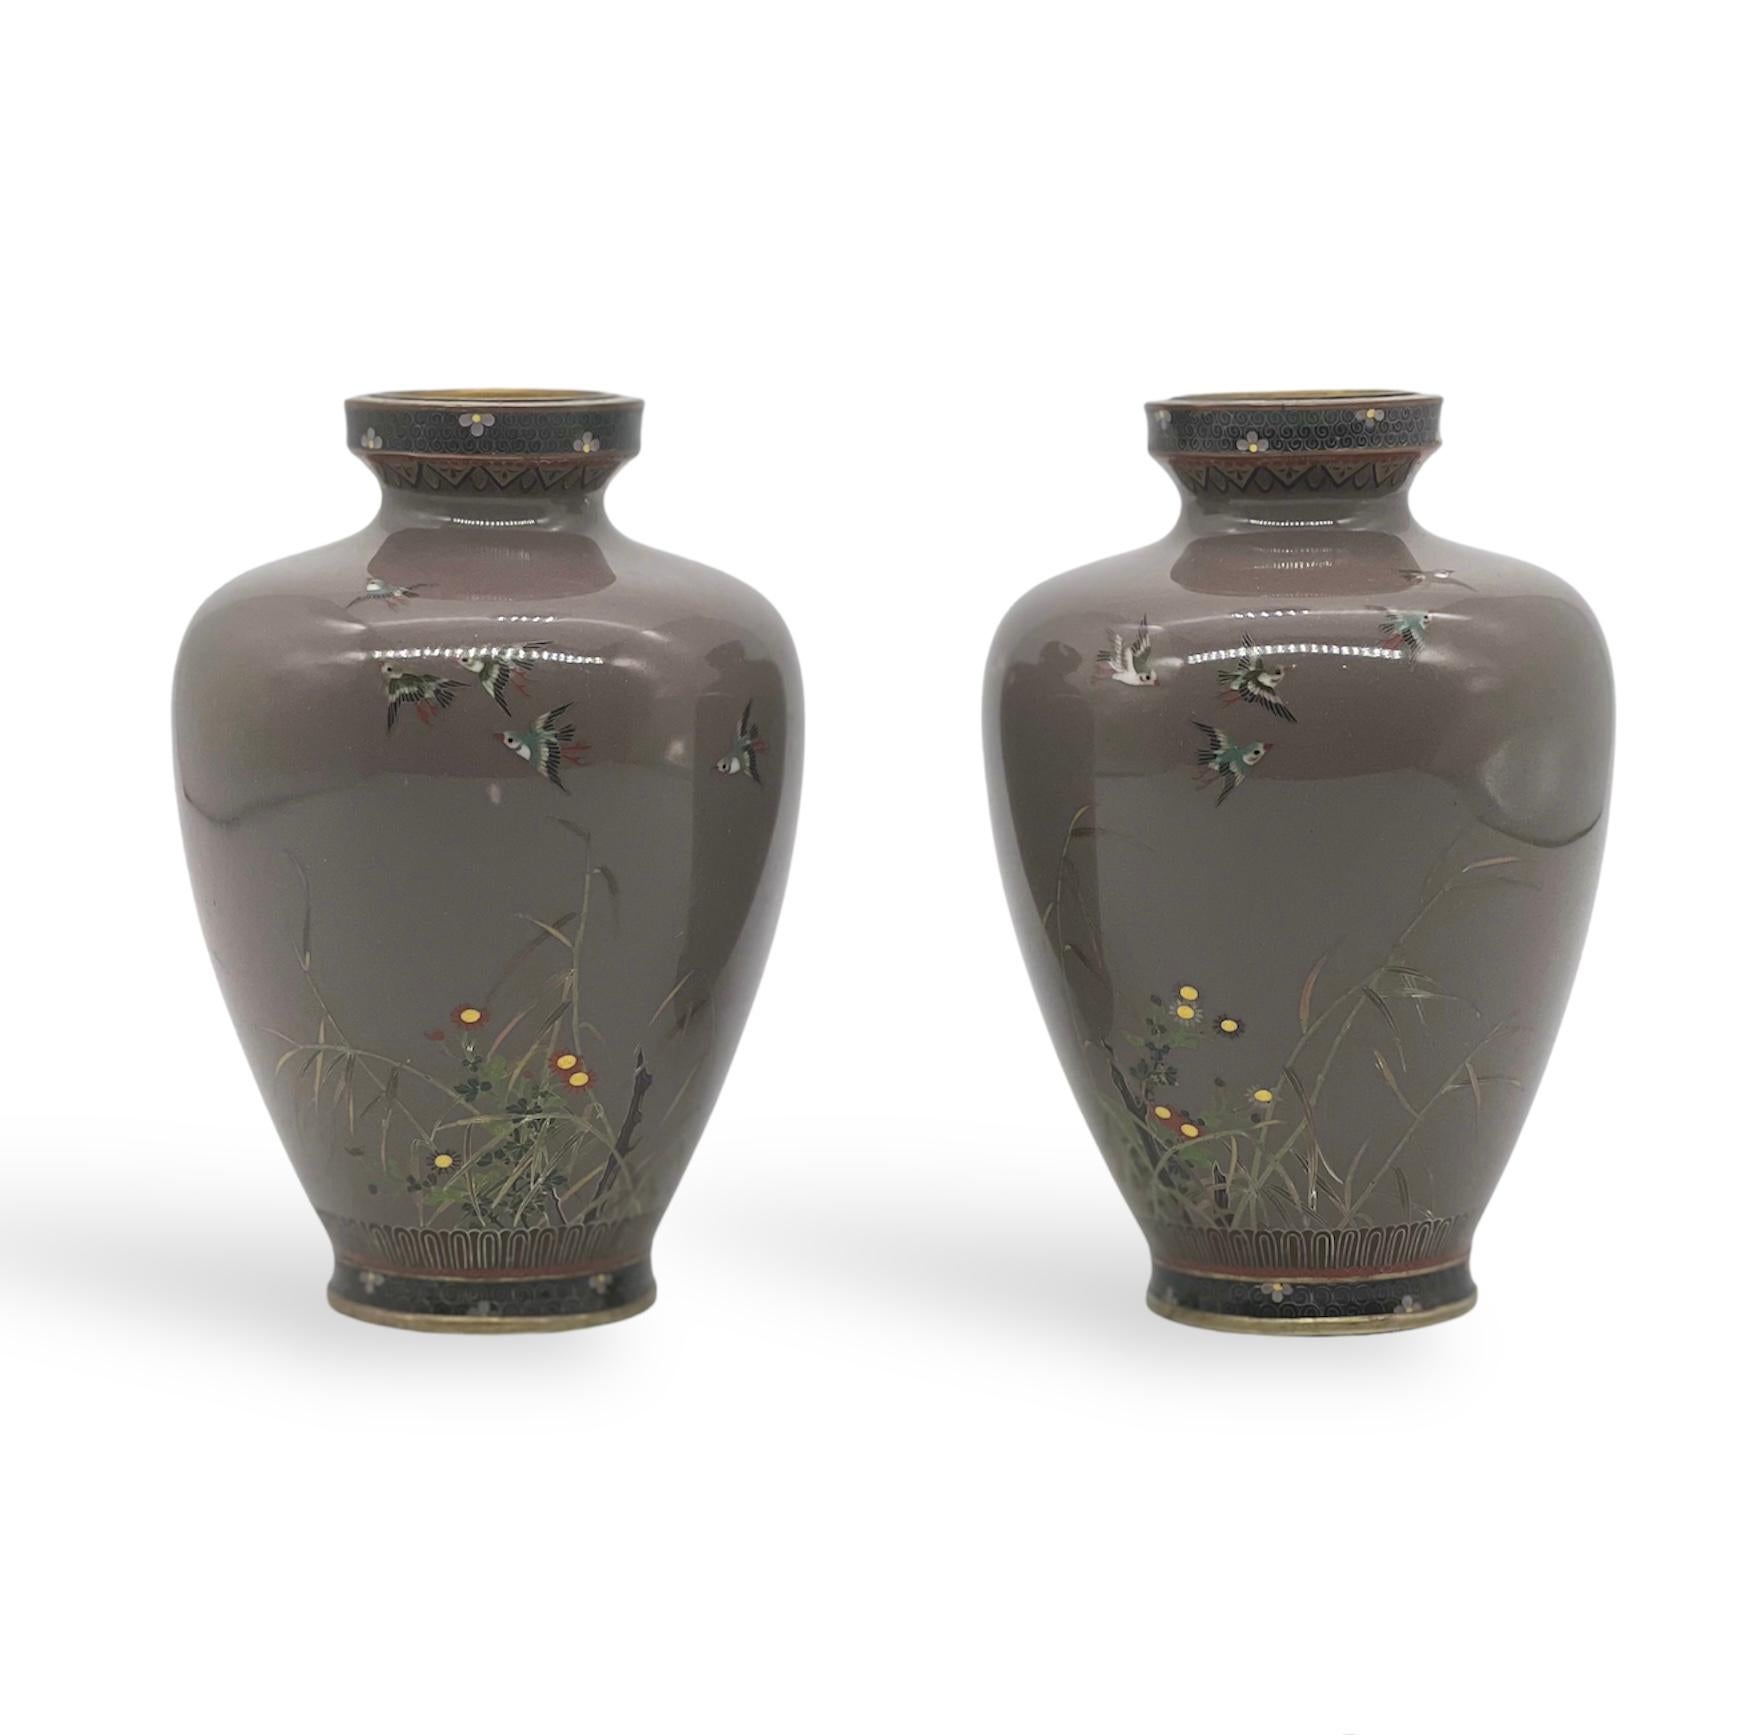 A Exquisite Pair of Japanese Cloisonne Enamel Vases Attributed to Hayashi Kodenji.
Meiji period 19th Century 


A Fine Pair of Japanese cloisonné enamel vases of shouldered tapering form, worked with silver wire and finely decorated with sparrows